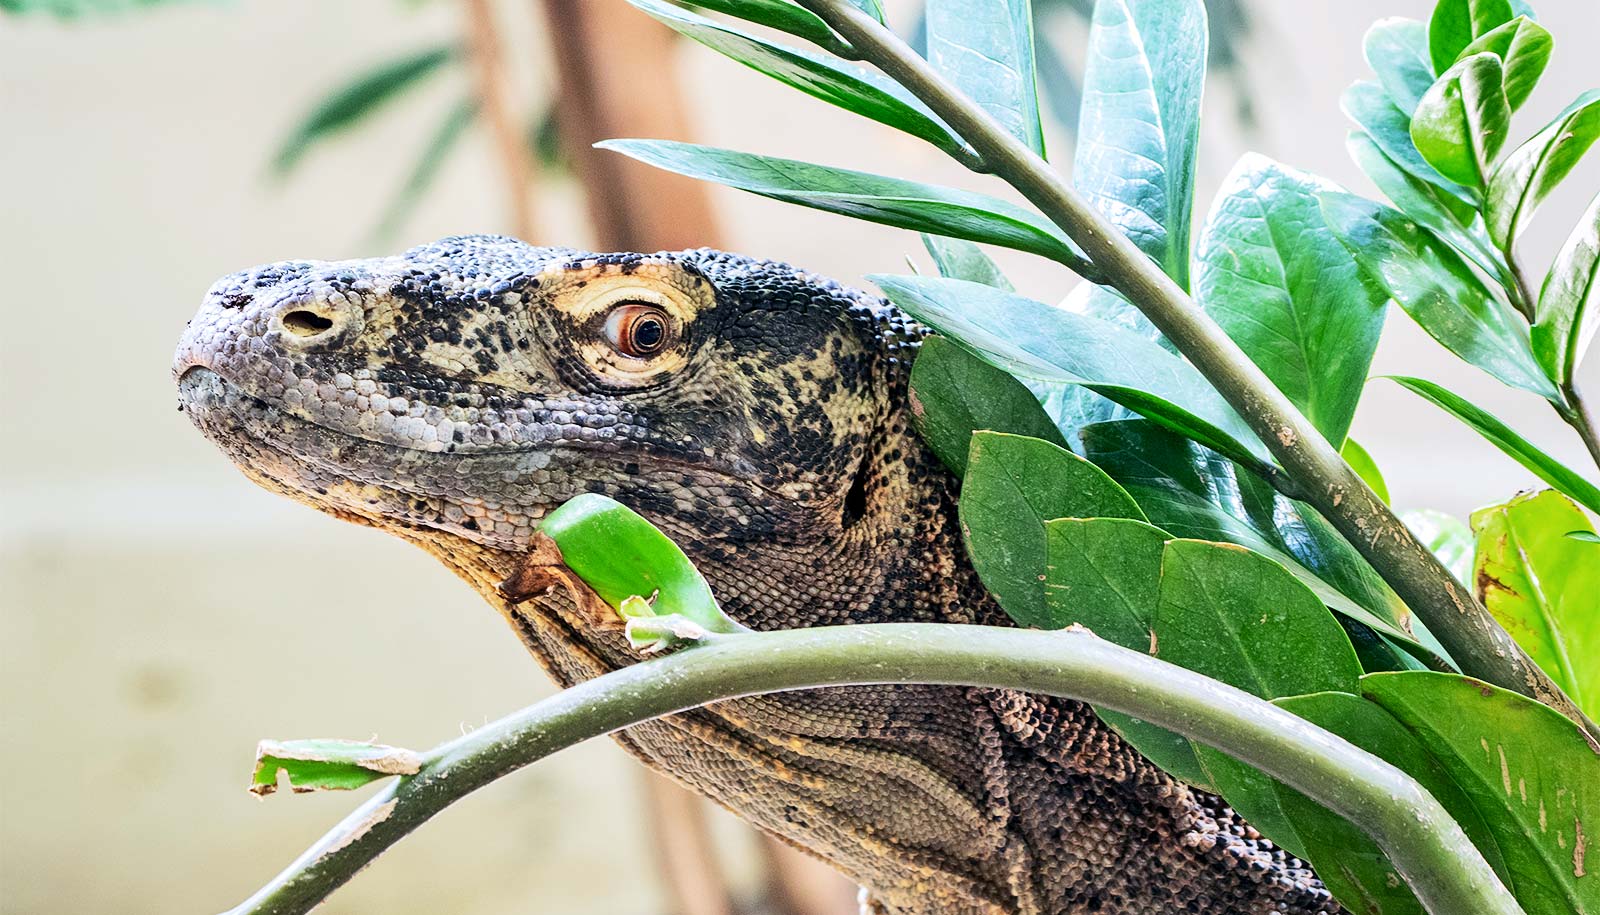 A komodo dragon pokes its head out from behind some leaves, looking over its shoulder